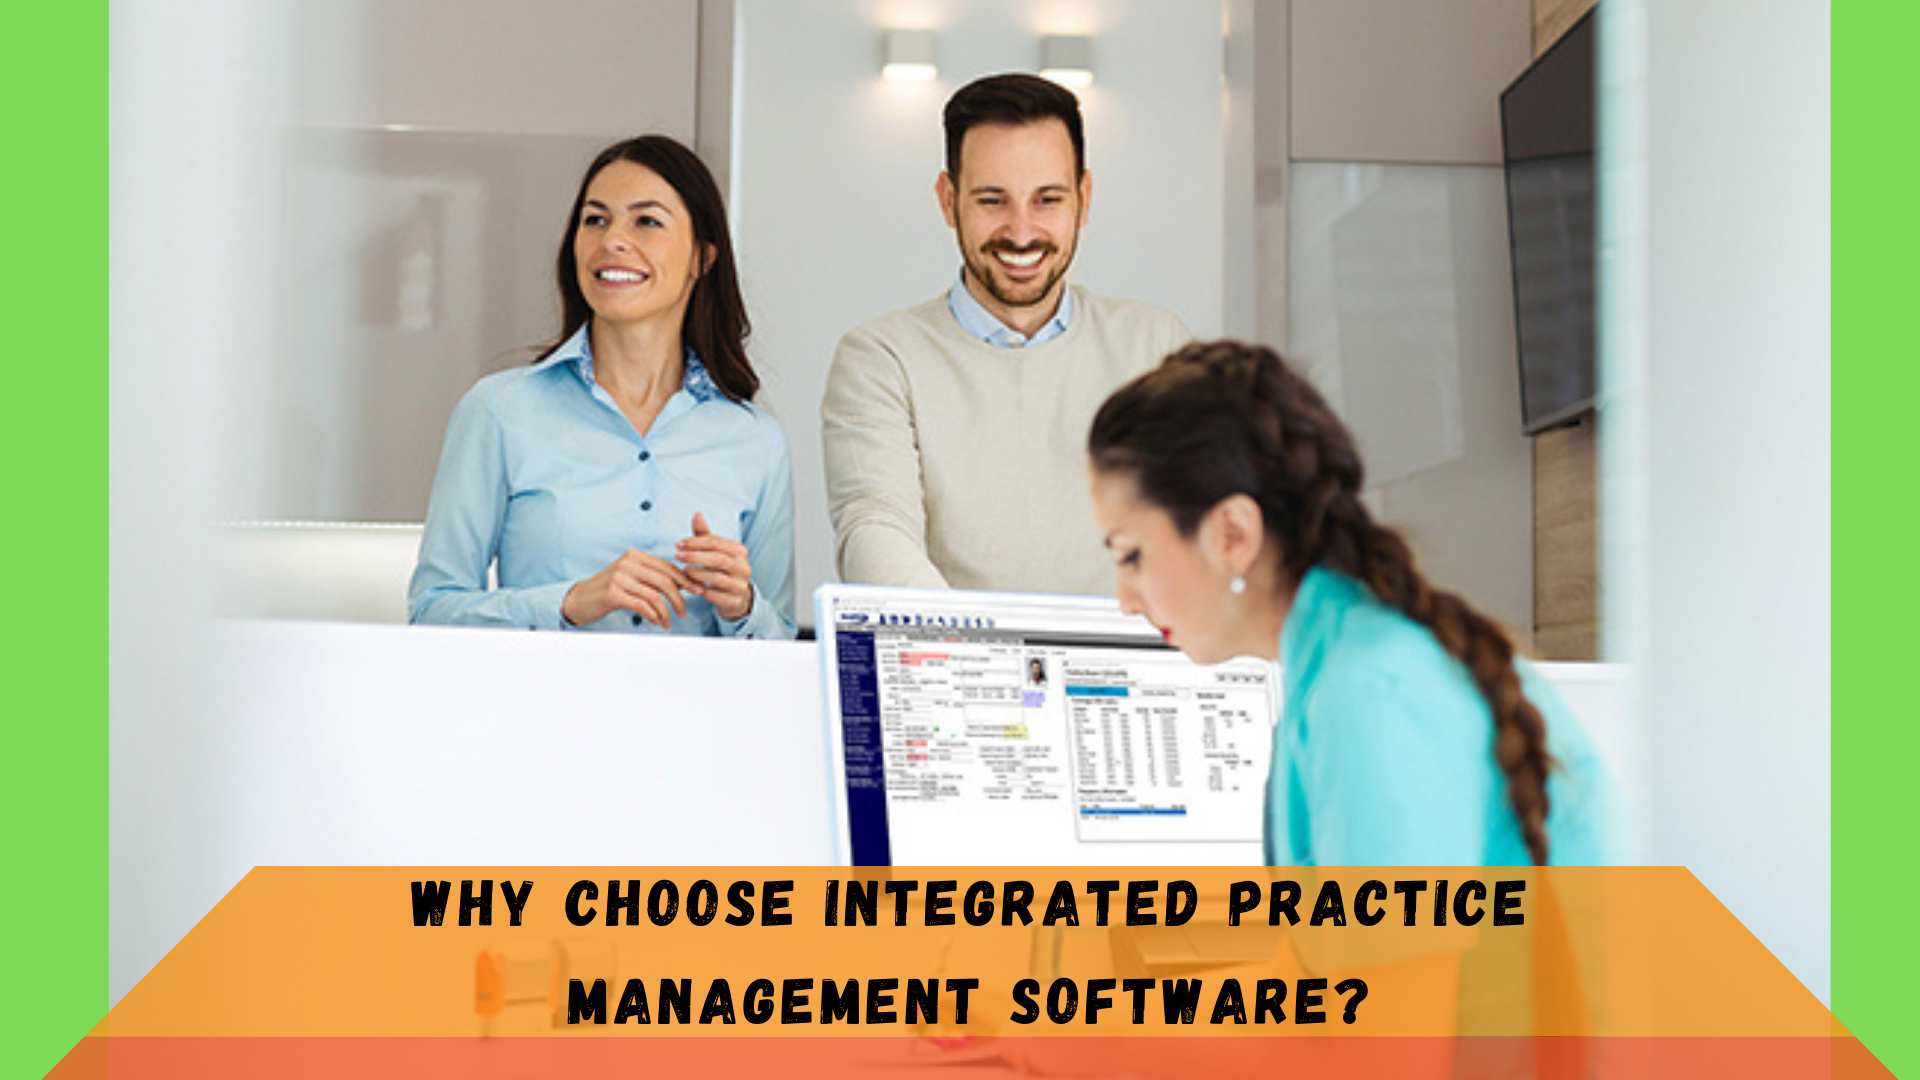 public/uploads/2021/11/Why-Choose-Integrated-Practice-Management-Software.png